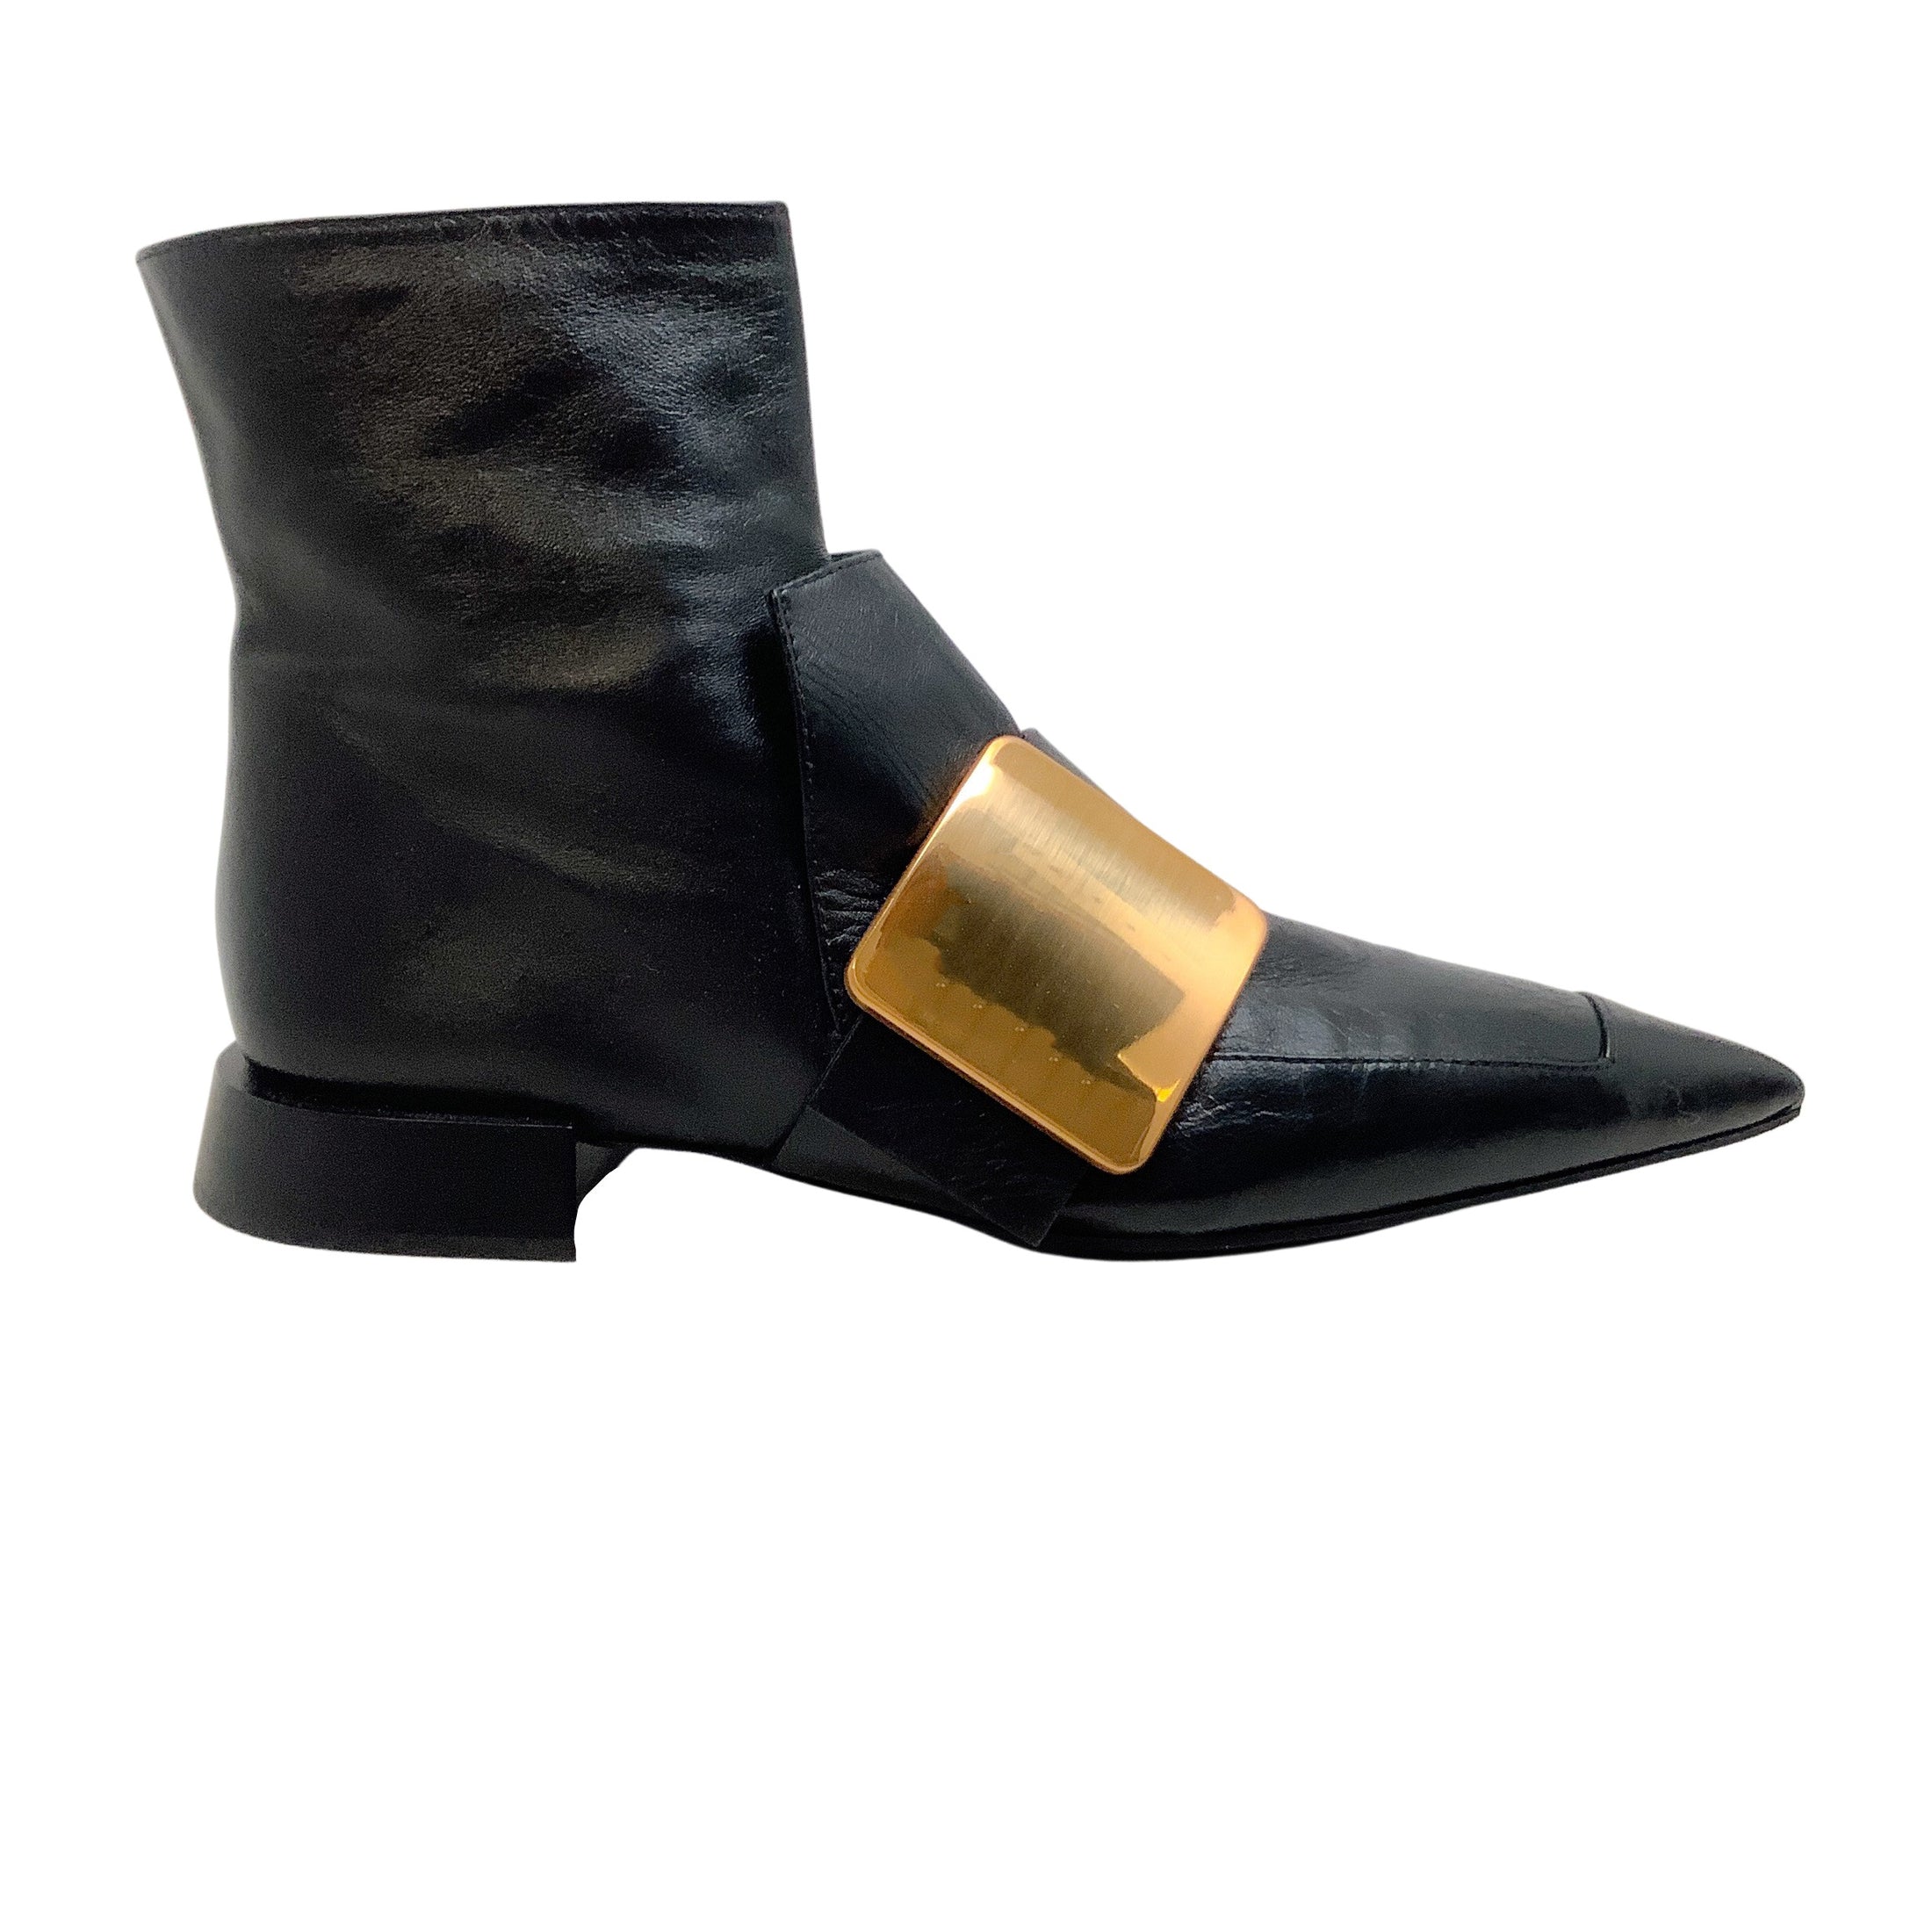 Jil Sander Black Leather Pointy Toe Gold Buckle Booties